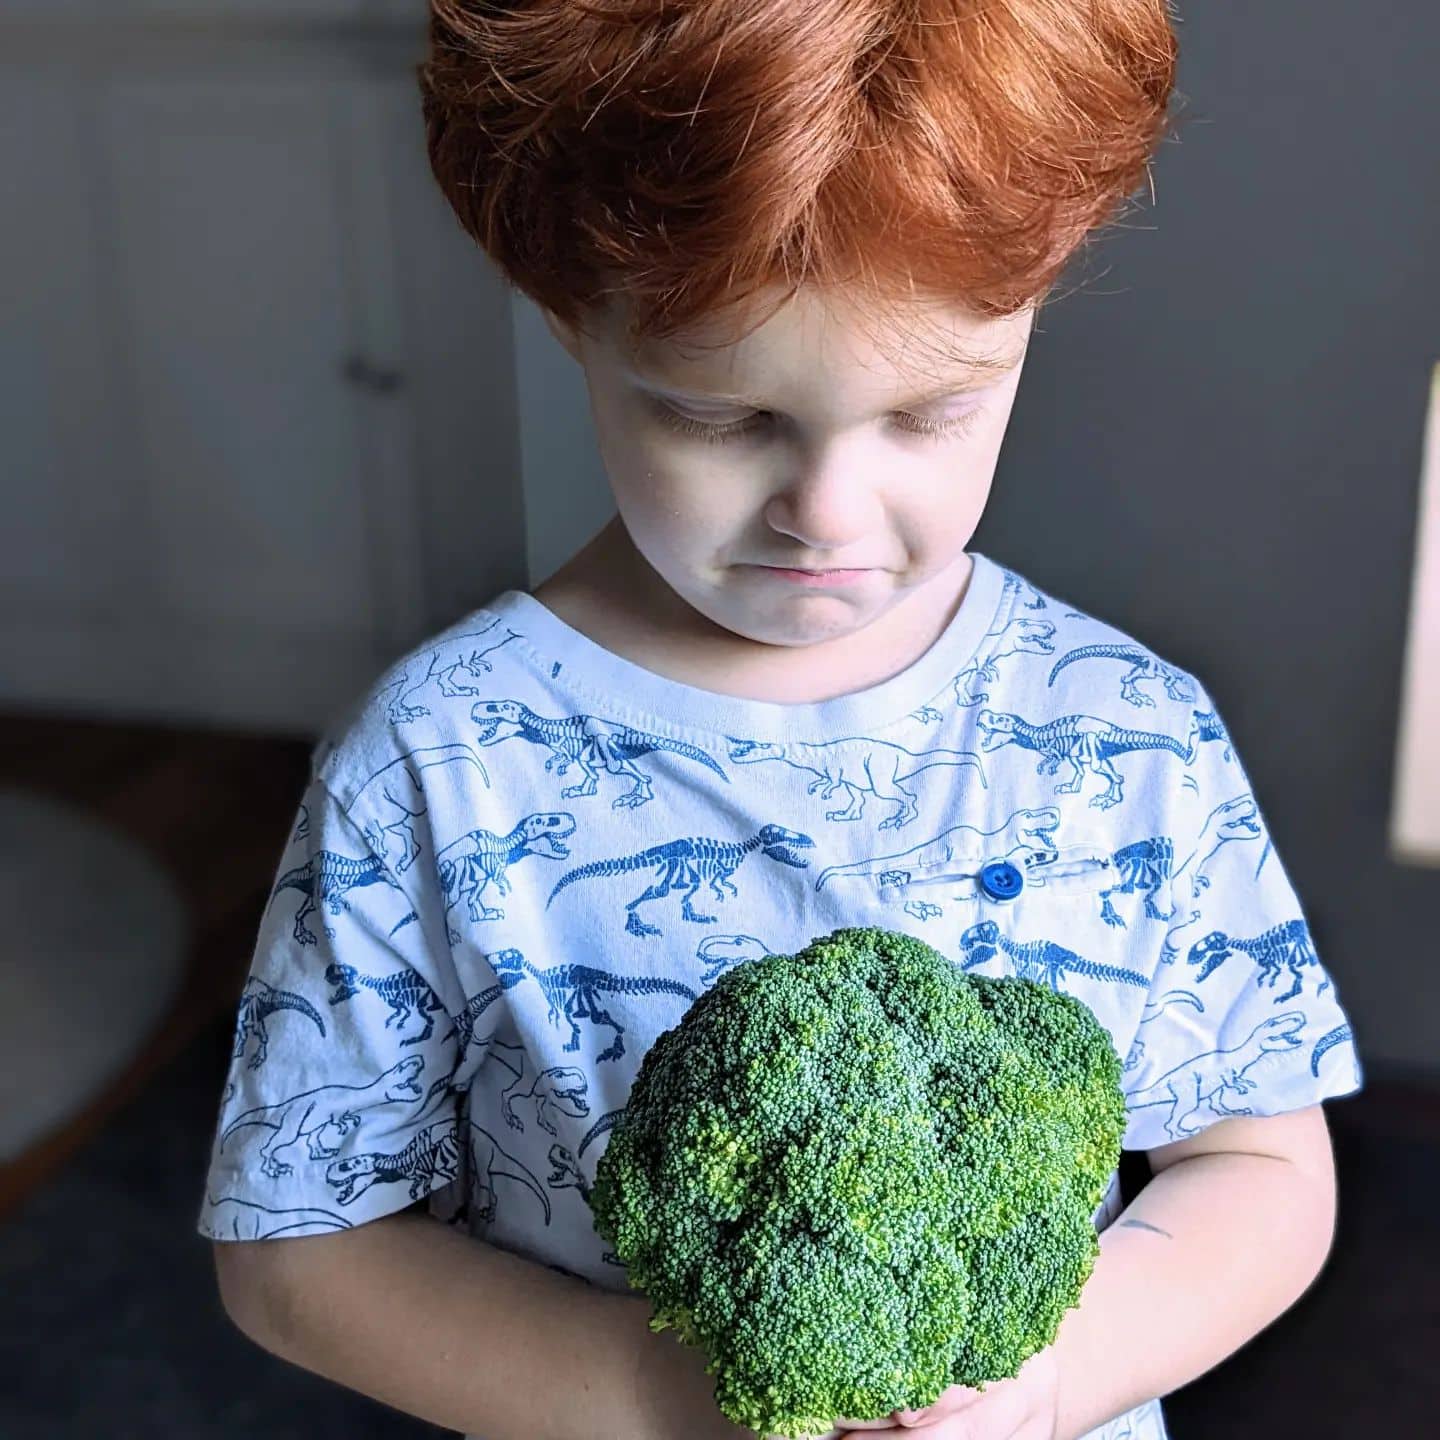 How did I wait 4 years for my son to try broccoli?

Yeah, 4 years is a very long time to keep calmly offering broccoli with him constantly turning up his nose at it… 

So how did I keep doing it?

I focused on nutrients, not food. 

Sure, broccoli is packed full of awesome nutrients like vitamin C, vitamin K and fibre. 

But so are many other foods! 

So I boosted the food he already loves to include those nutrients (added spinach to his smoothie, oats to his muffins, and mandarins in his school lunches). 

And then I was all set to play the long game on broccoli. 

When your kids don’t need broccoli to be healthy, it suddenly takes all the stress out of meal times! 

If you’d like to learn more about my process for taking the stress out of feeding your kids, I’m releasing a new version of my Healthy Vegan Kids course in June. 

Send me a message for more details and to join the waitlist for access to early bird bonuses.

#vegancoaching #vegankidsofig #vegannutrition #healthyvegankids #vegankids #vegannutritioncoach #veganparents #vegannutritionist #fussykids #vegancoaching #vegan #vegansofig #veganparentsaustralia #veganparentsofig